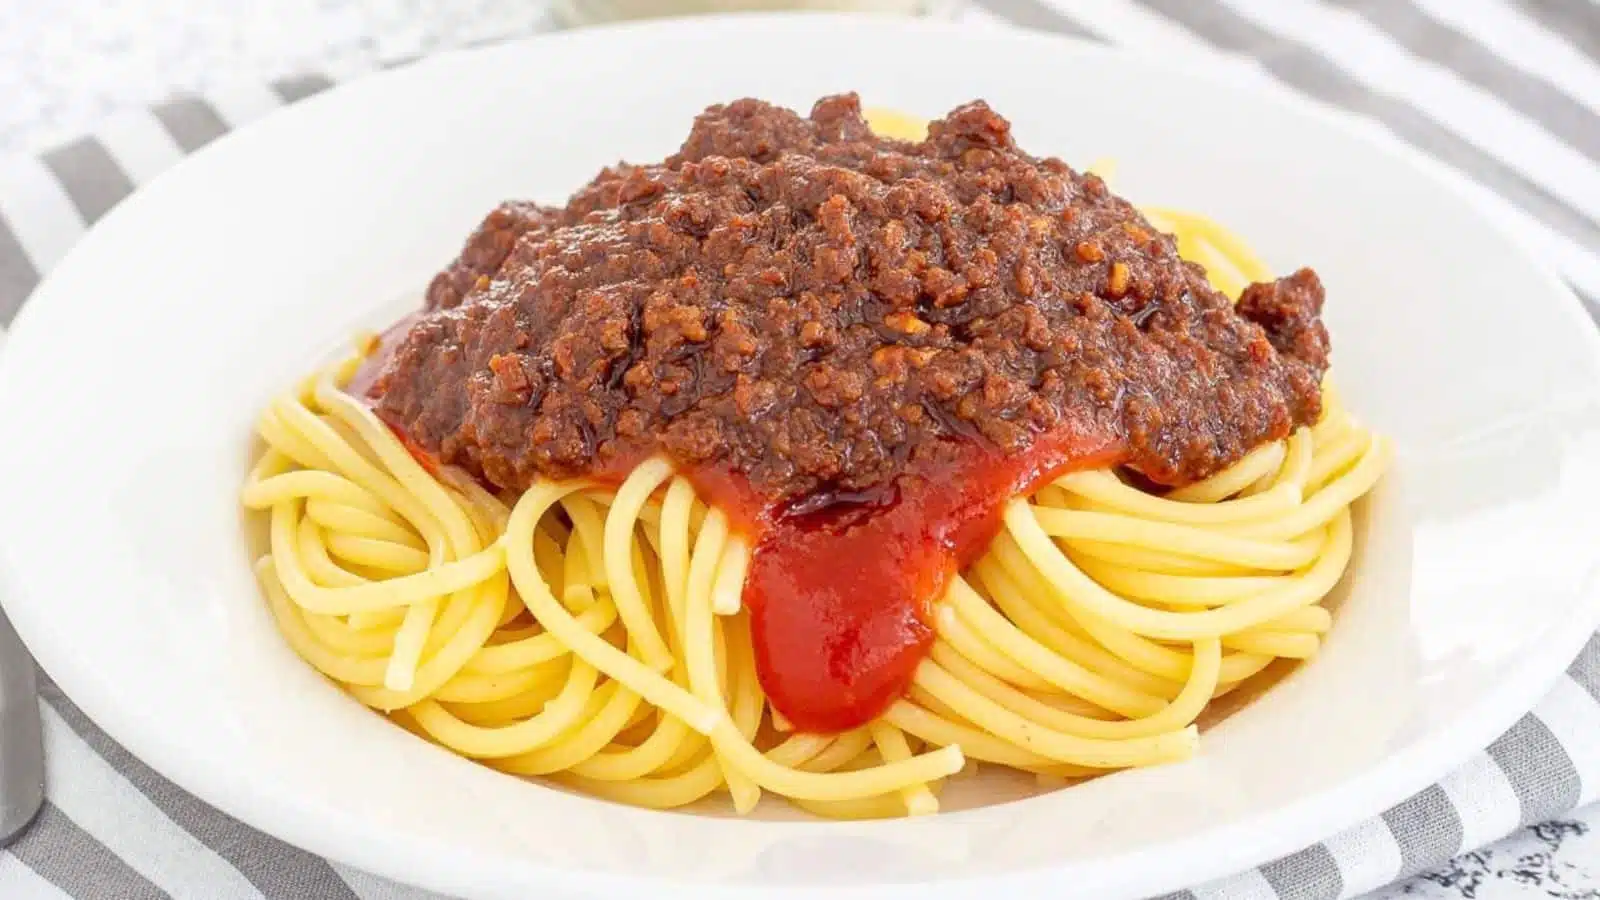 Spaghetti with tomato sauce and ground beef on it - all in a white bowl